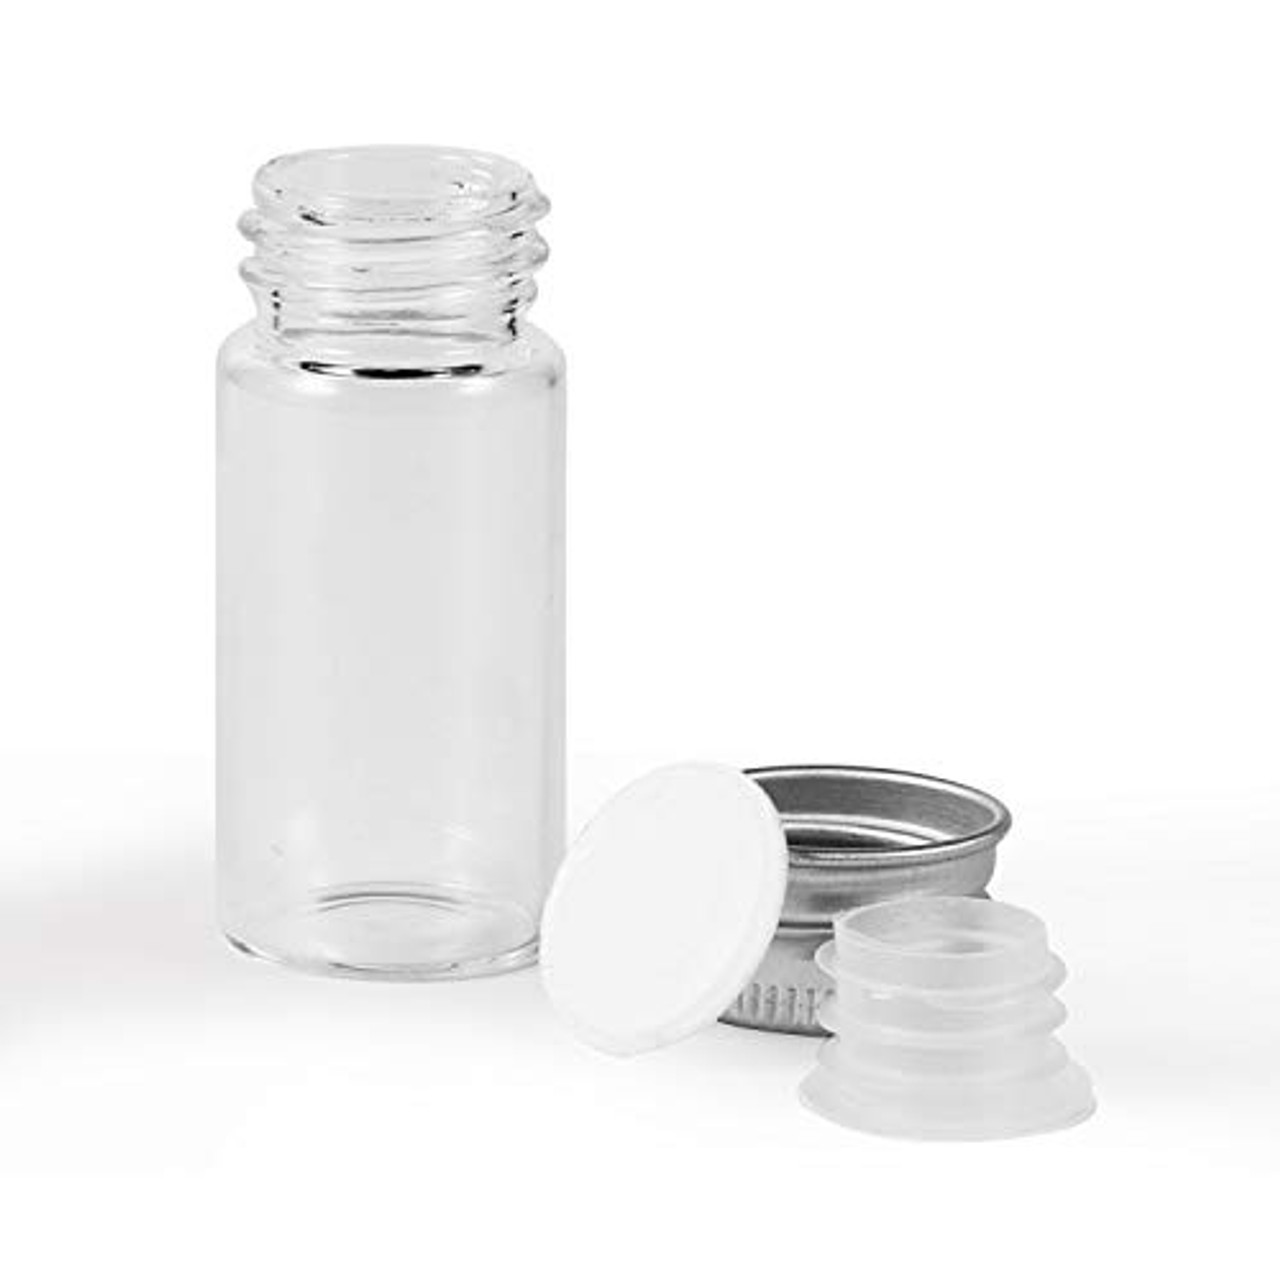 5ml Graduated Plastic Vials, Leak-proof Screw Cap With Frosted